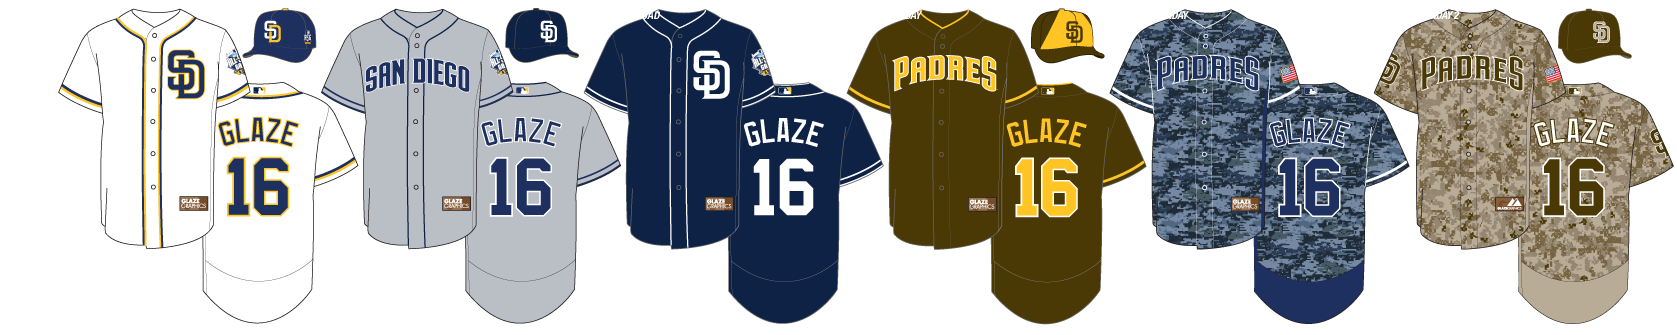 Padres coming in calienteeee with these jerseys 🥵🔥